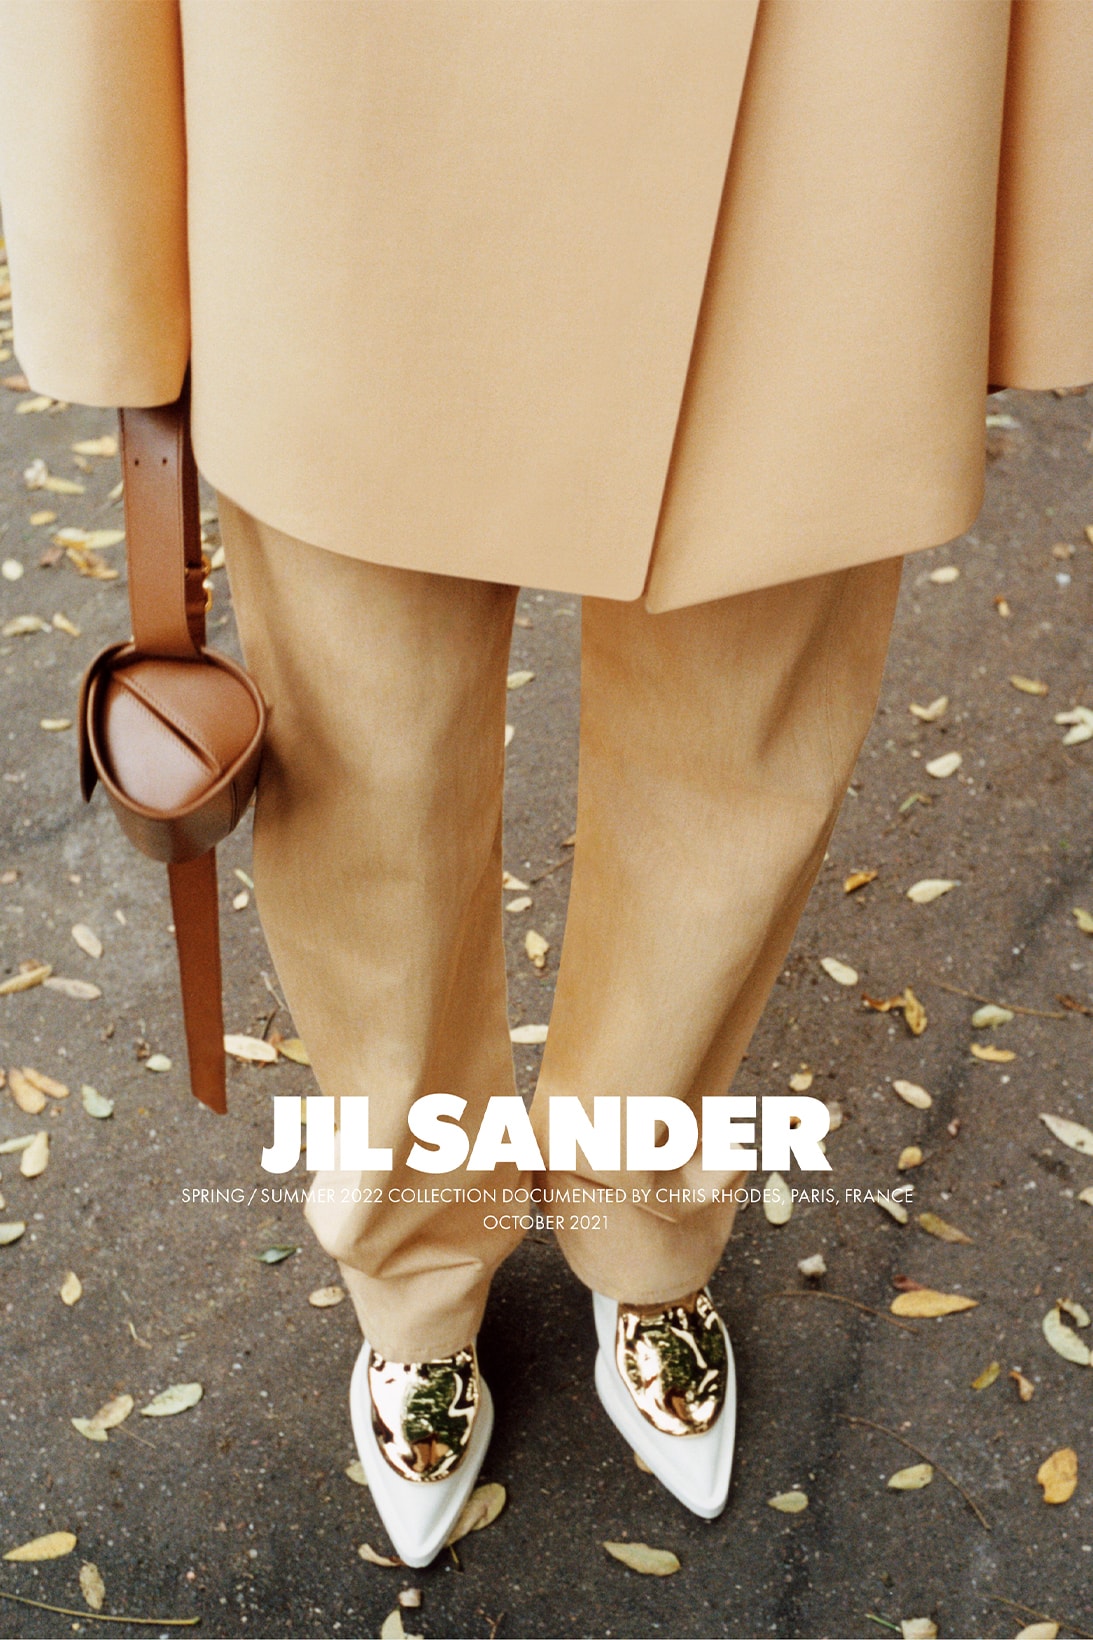 Jil Sander Spring Summer 2022 Collection Advertising Campaign Modern Photography Experimental Cinema Book